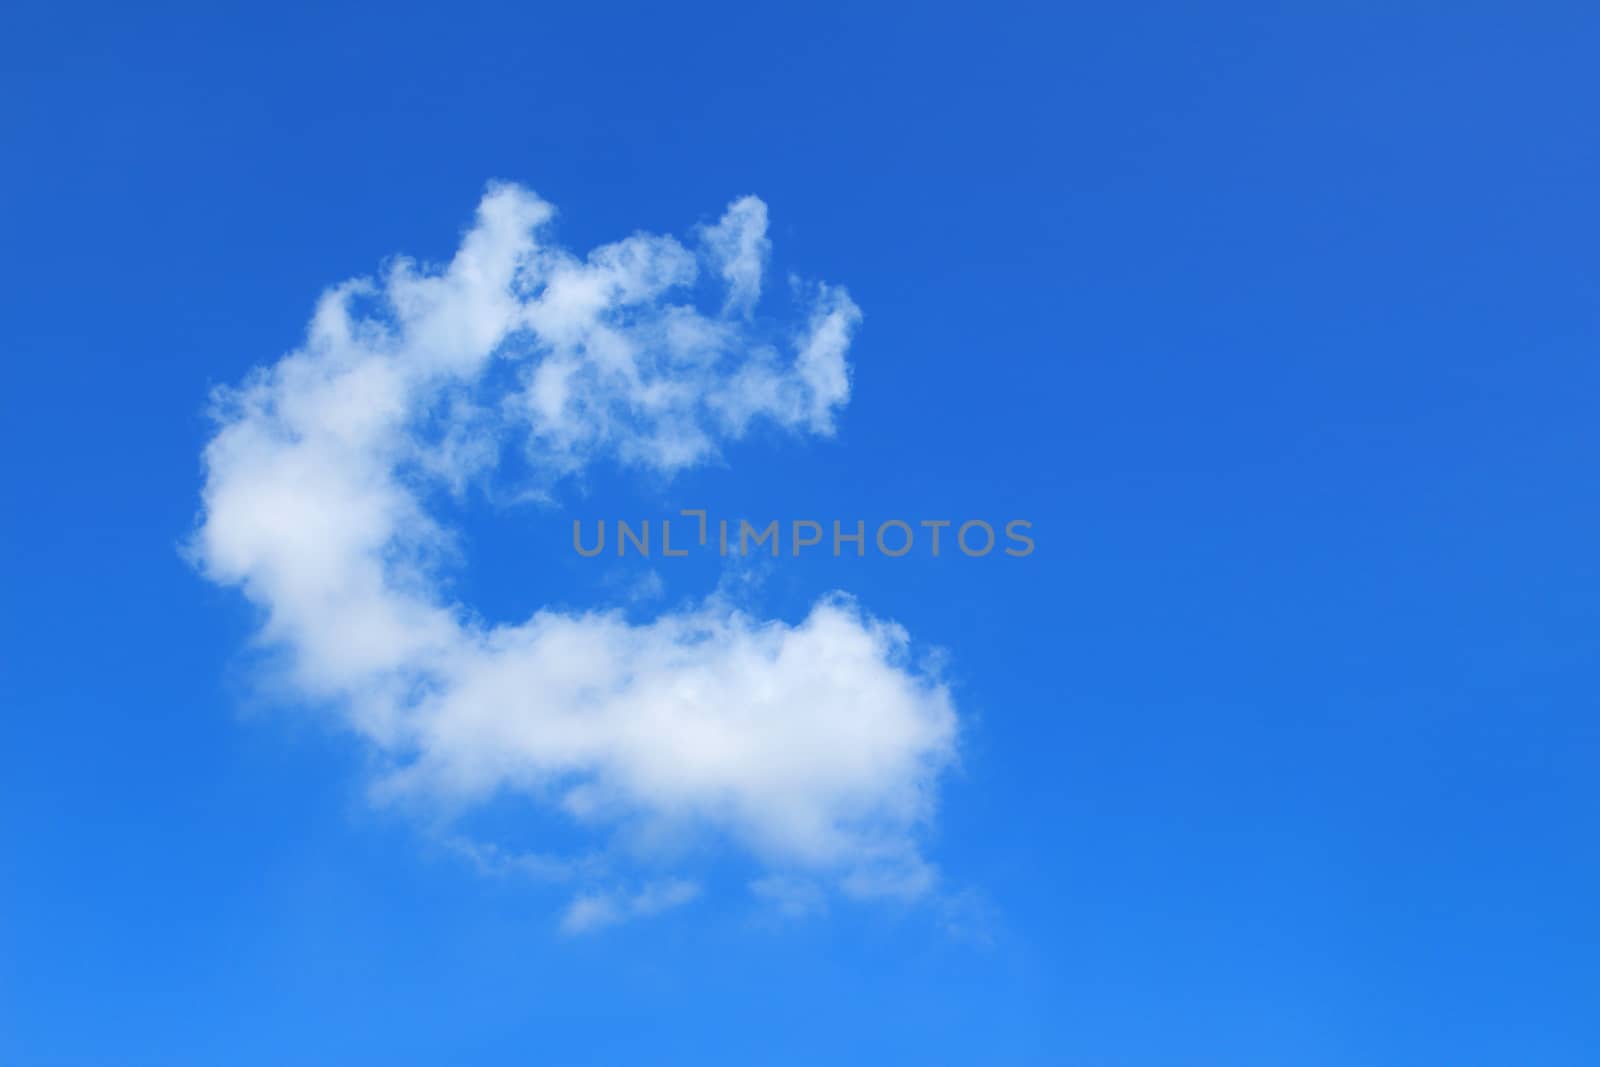 Clouds in shape of the letter c by foto76